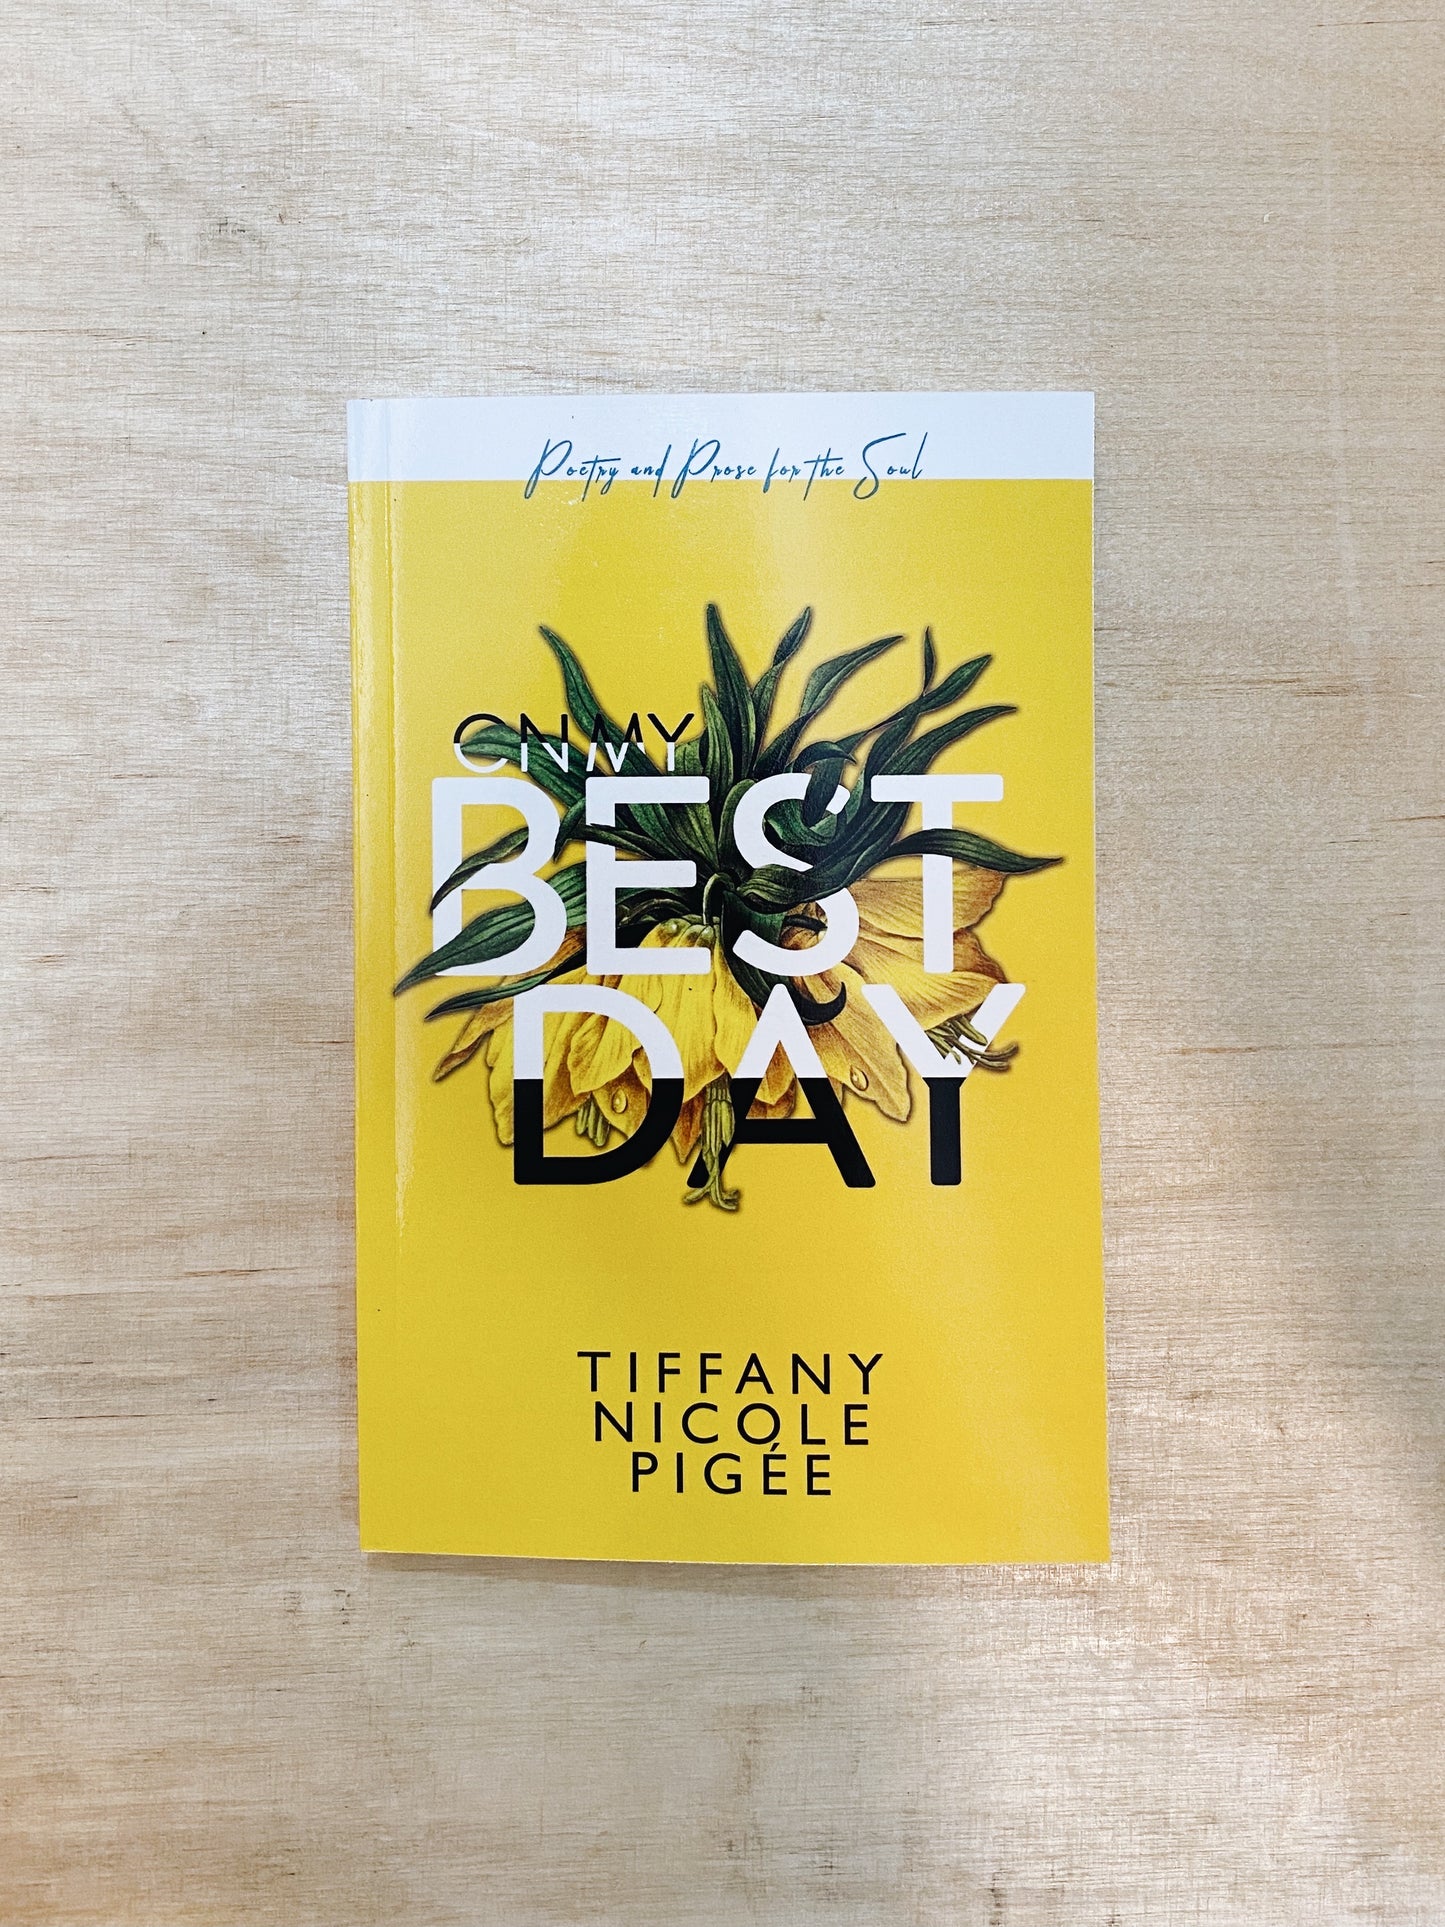 Tiffany Nicole Pigée - On My Best Day: Poetry and Prose for the Soul